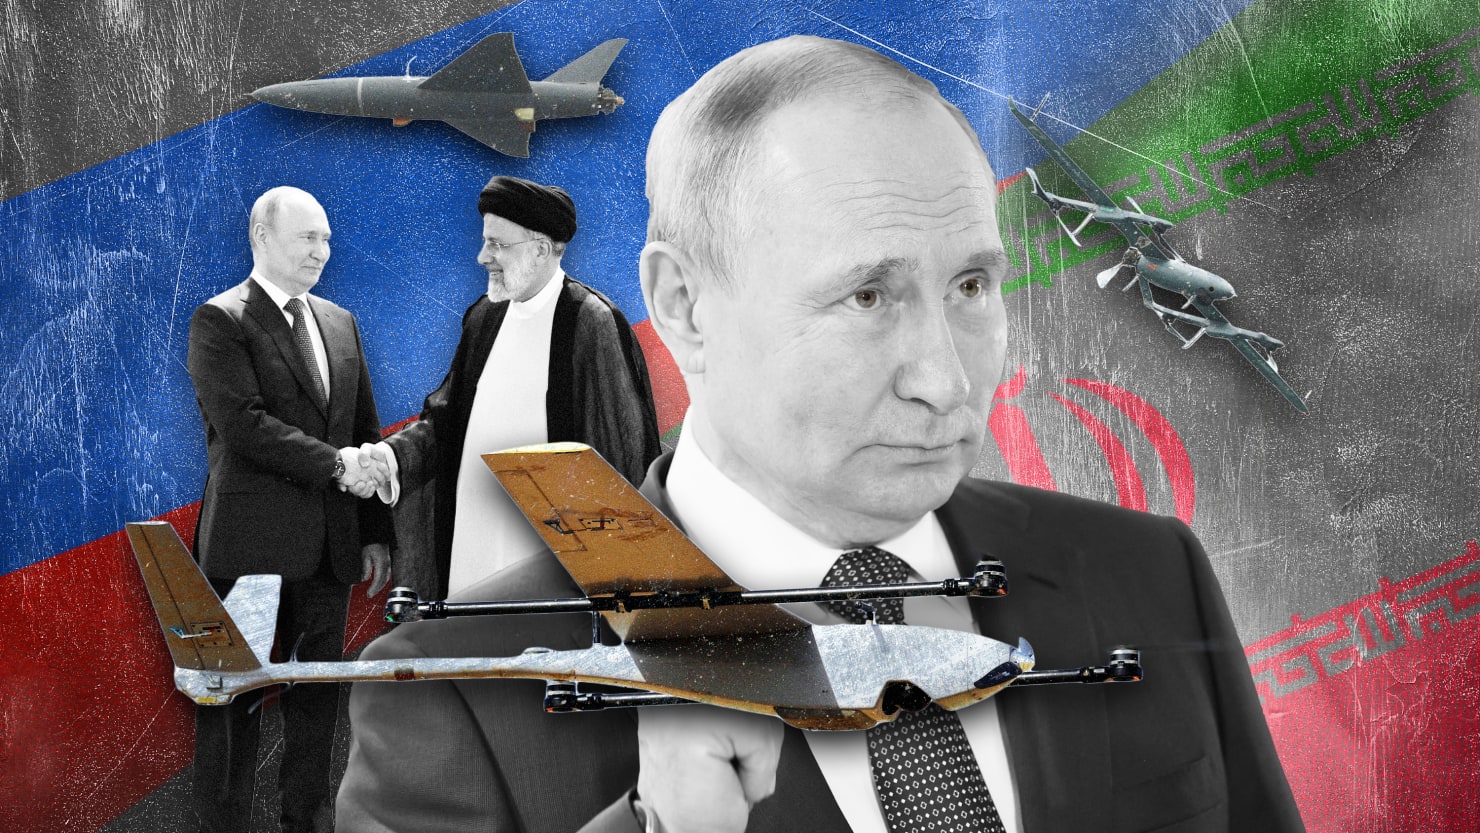 With the Iranian-made Shahed-136 drone, Putin puts faith in poor man's  weapon